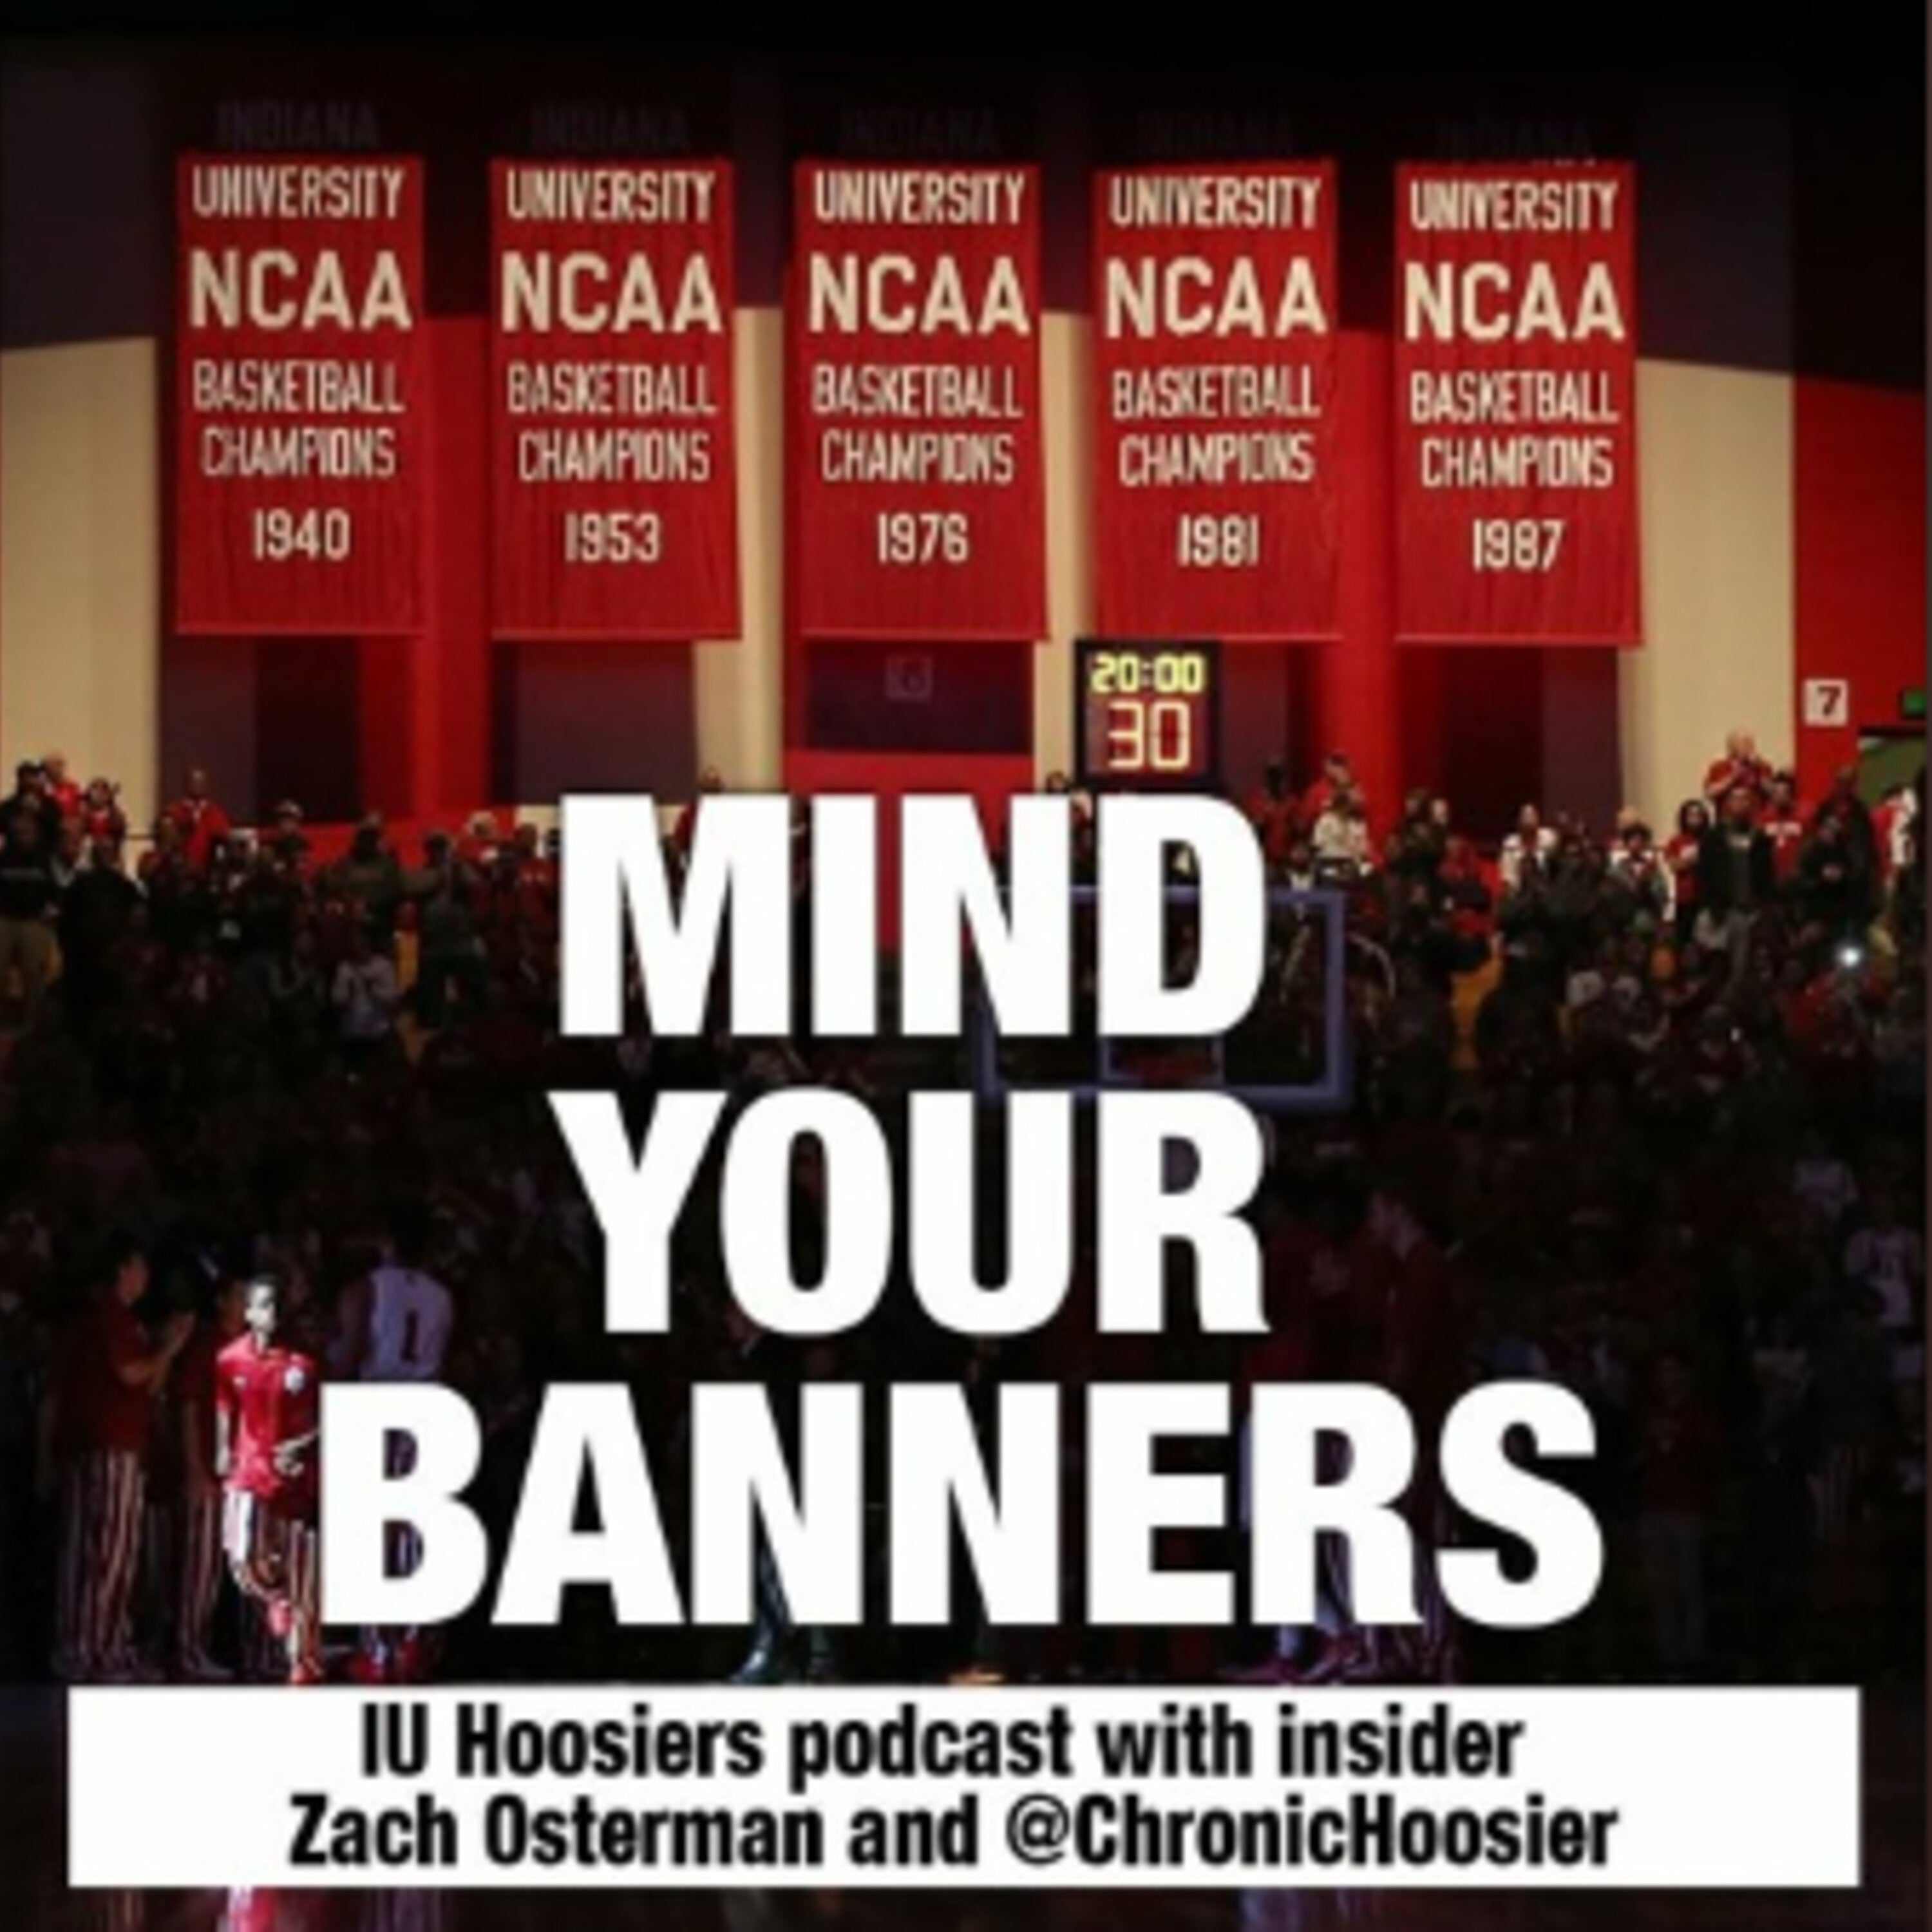 Mind Your Banners: Recapping a wild week for Woodson and the Hoosiers